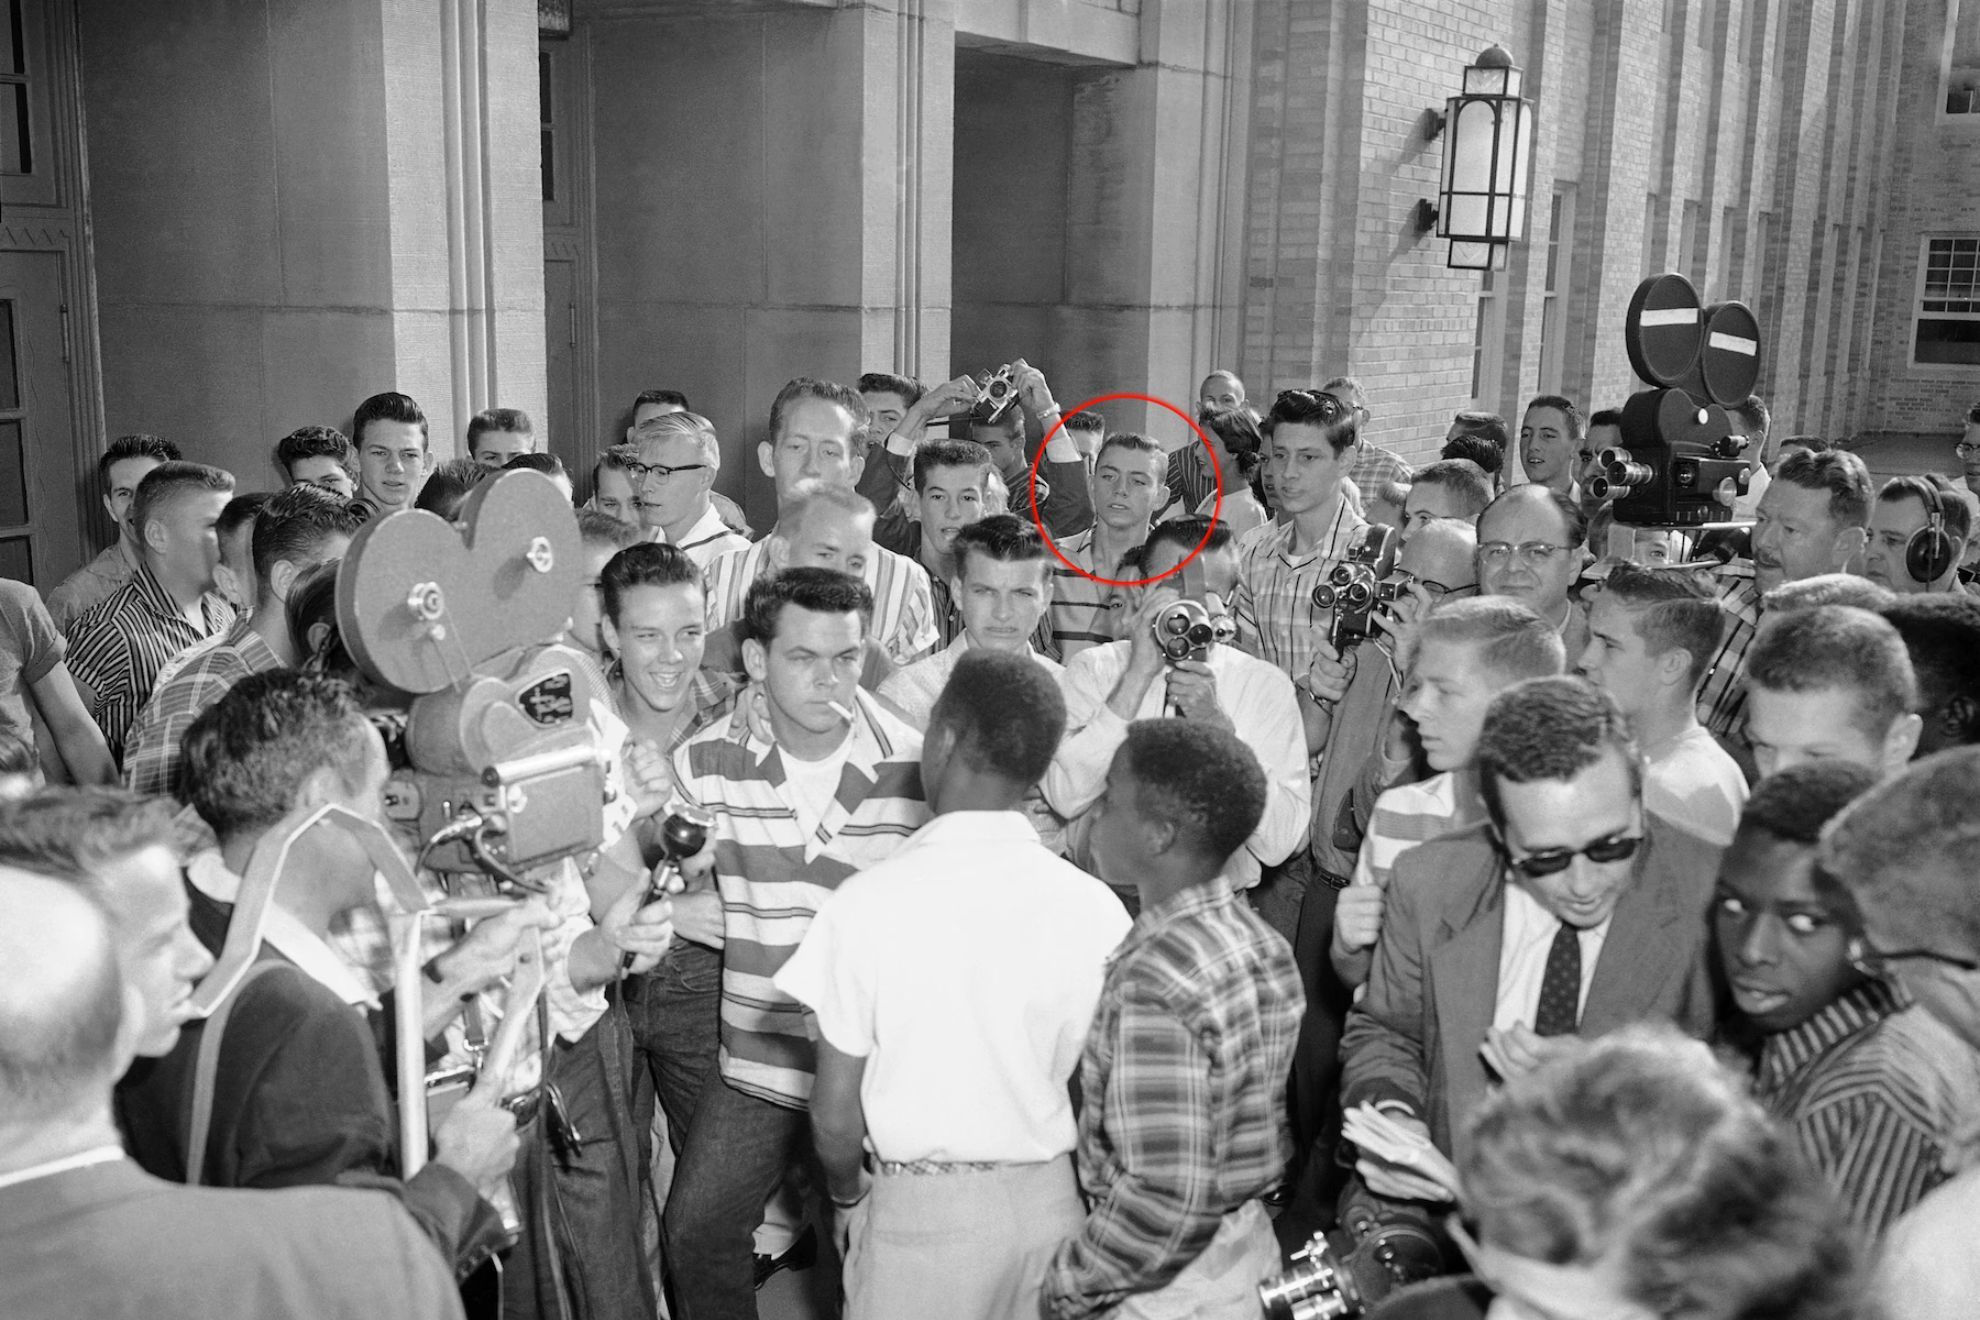 White students at Arkansas' North Little Rock High deny access to six Black students. Jerry Jones is circled.